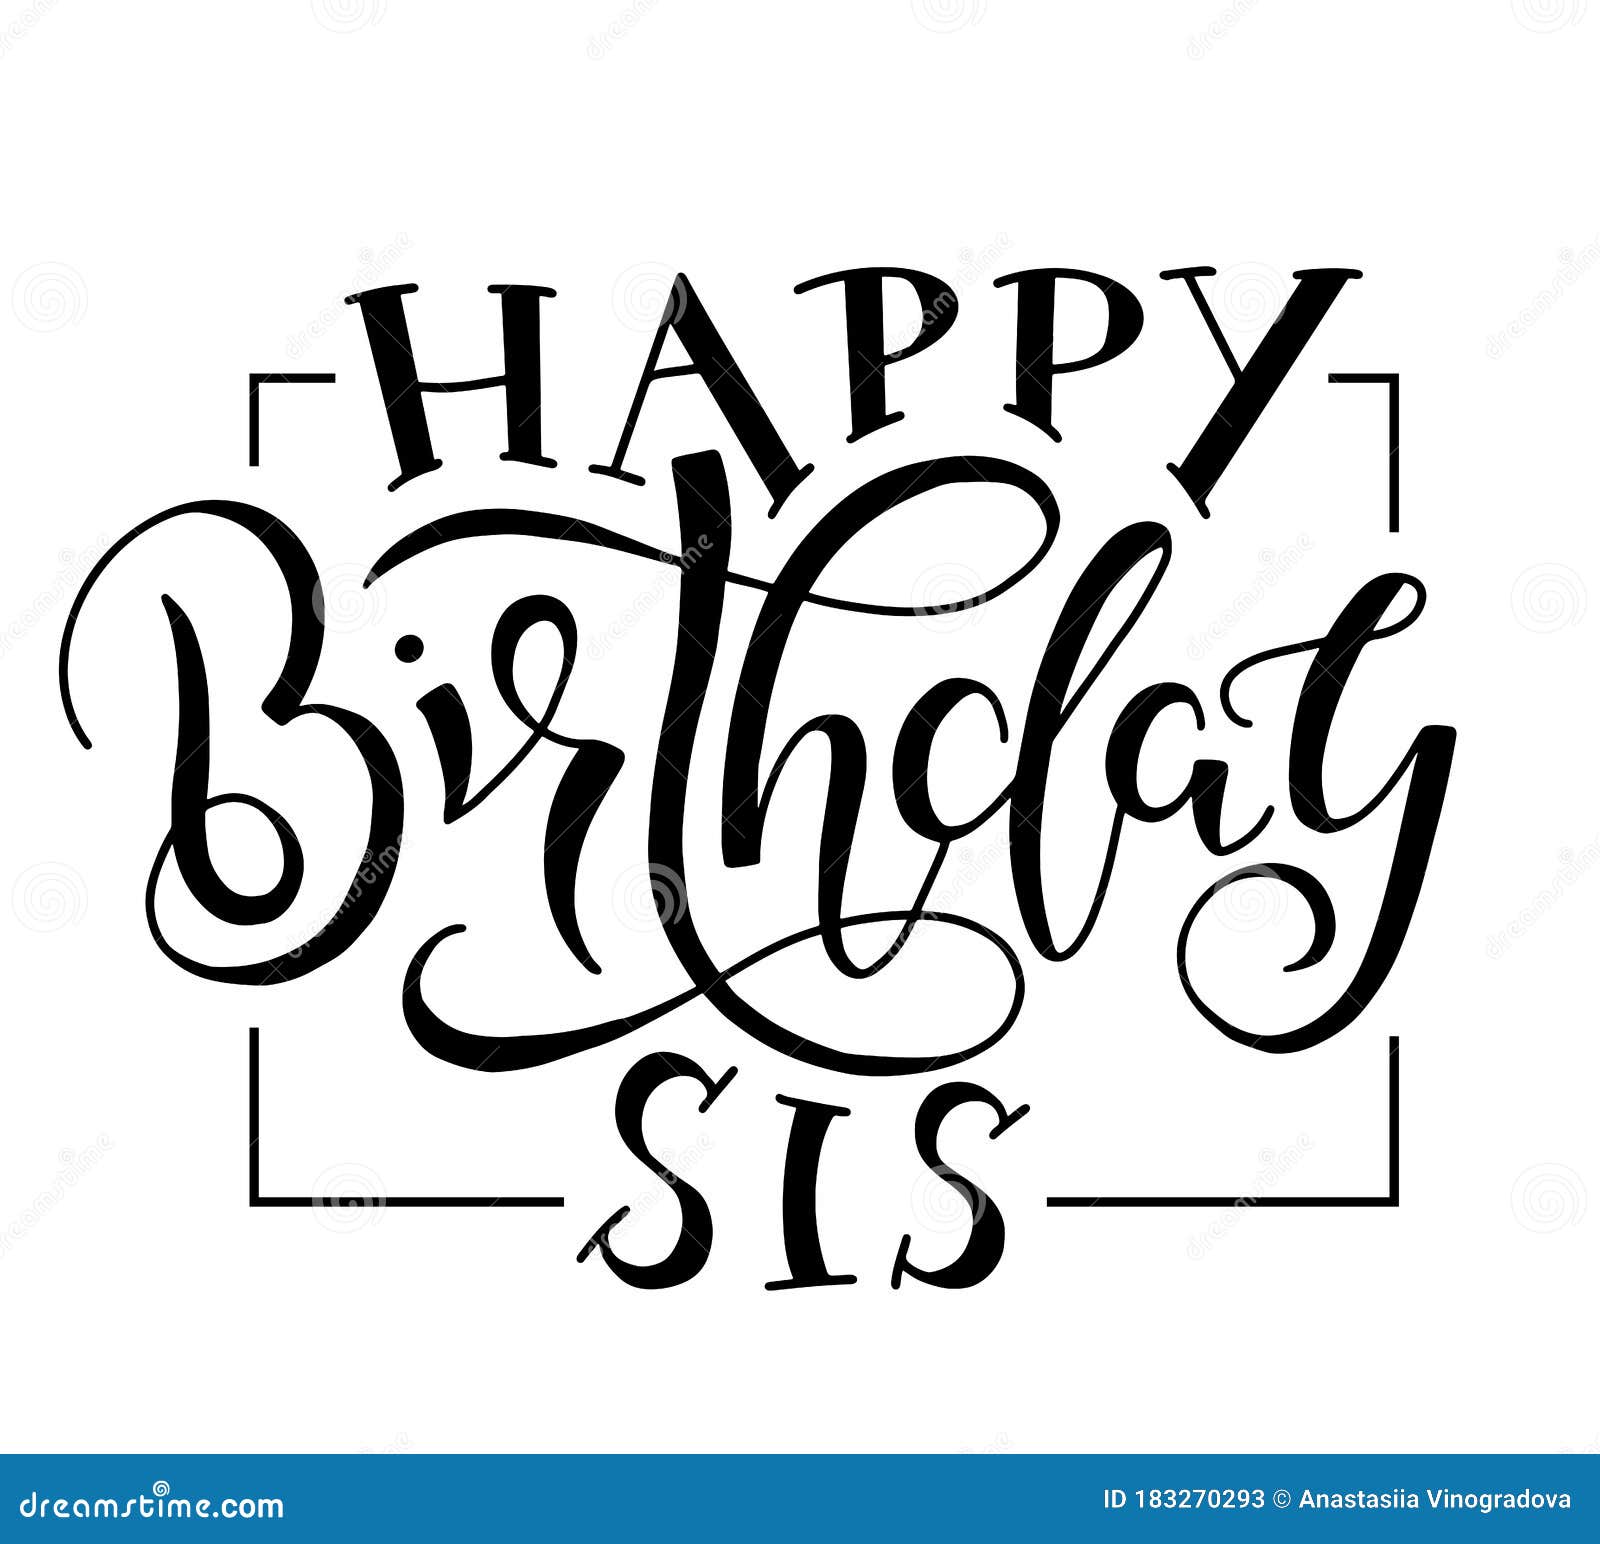 Download Happy Birthday Sis Black Text With Ribbon Isolated On ...